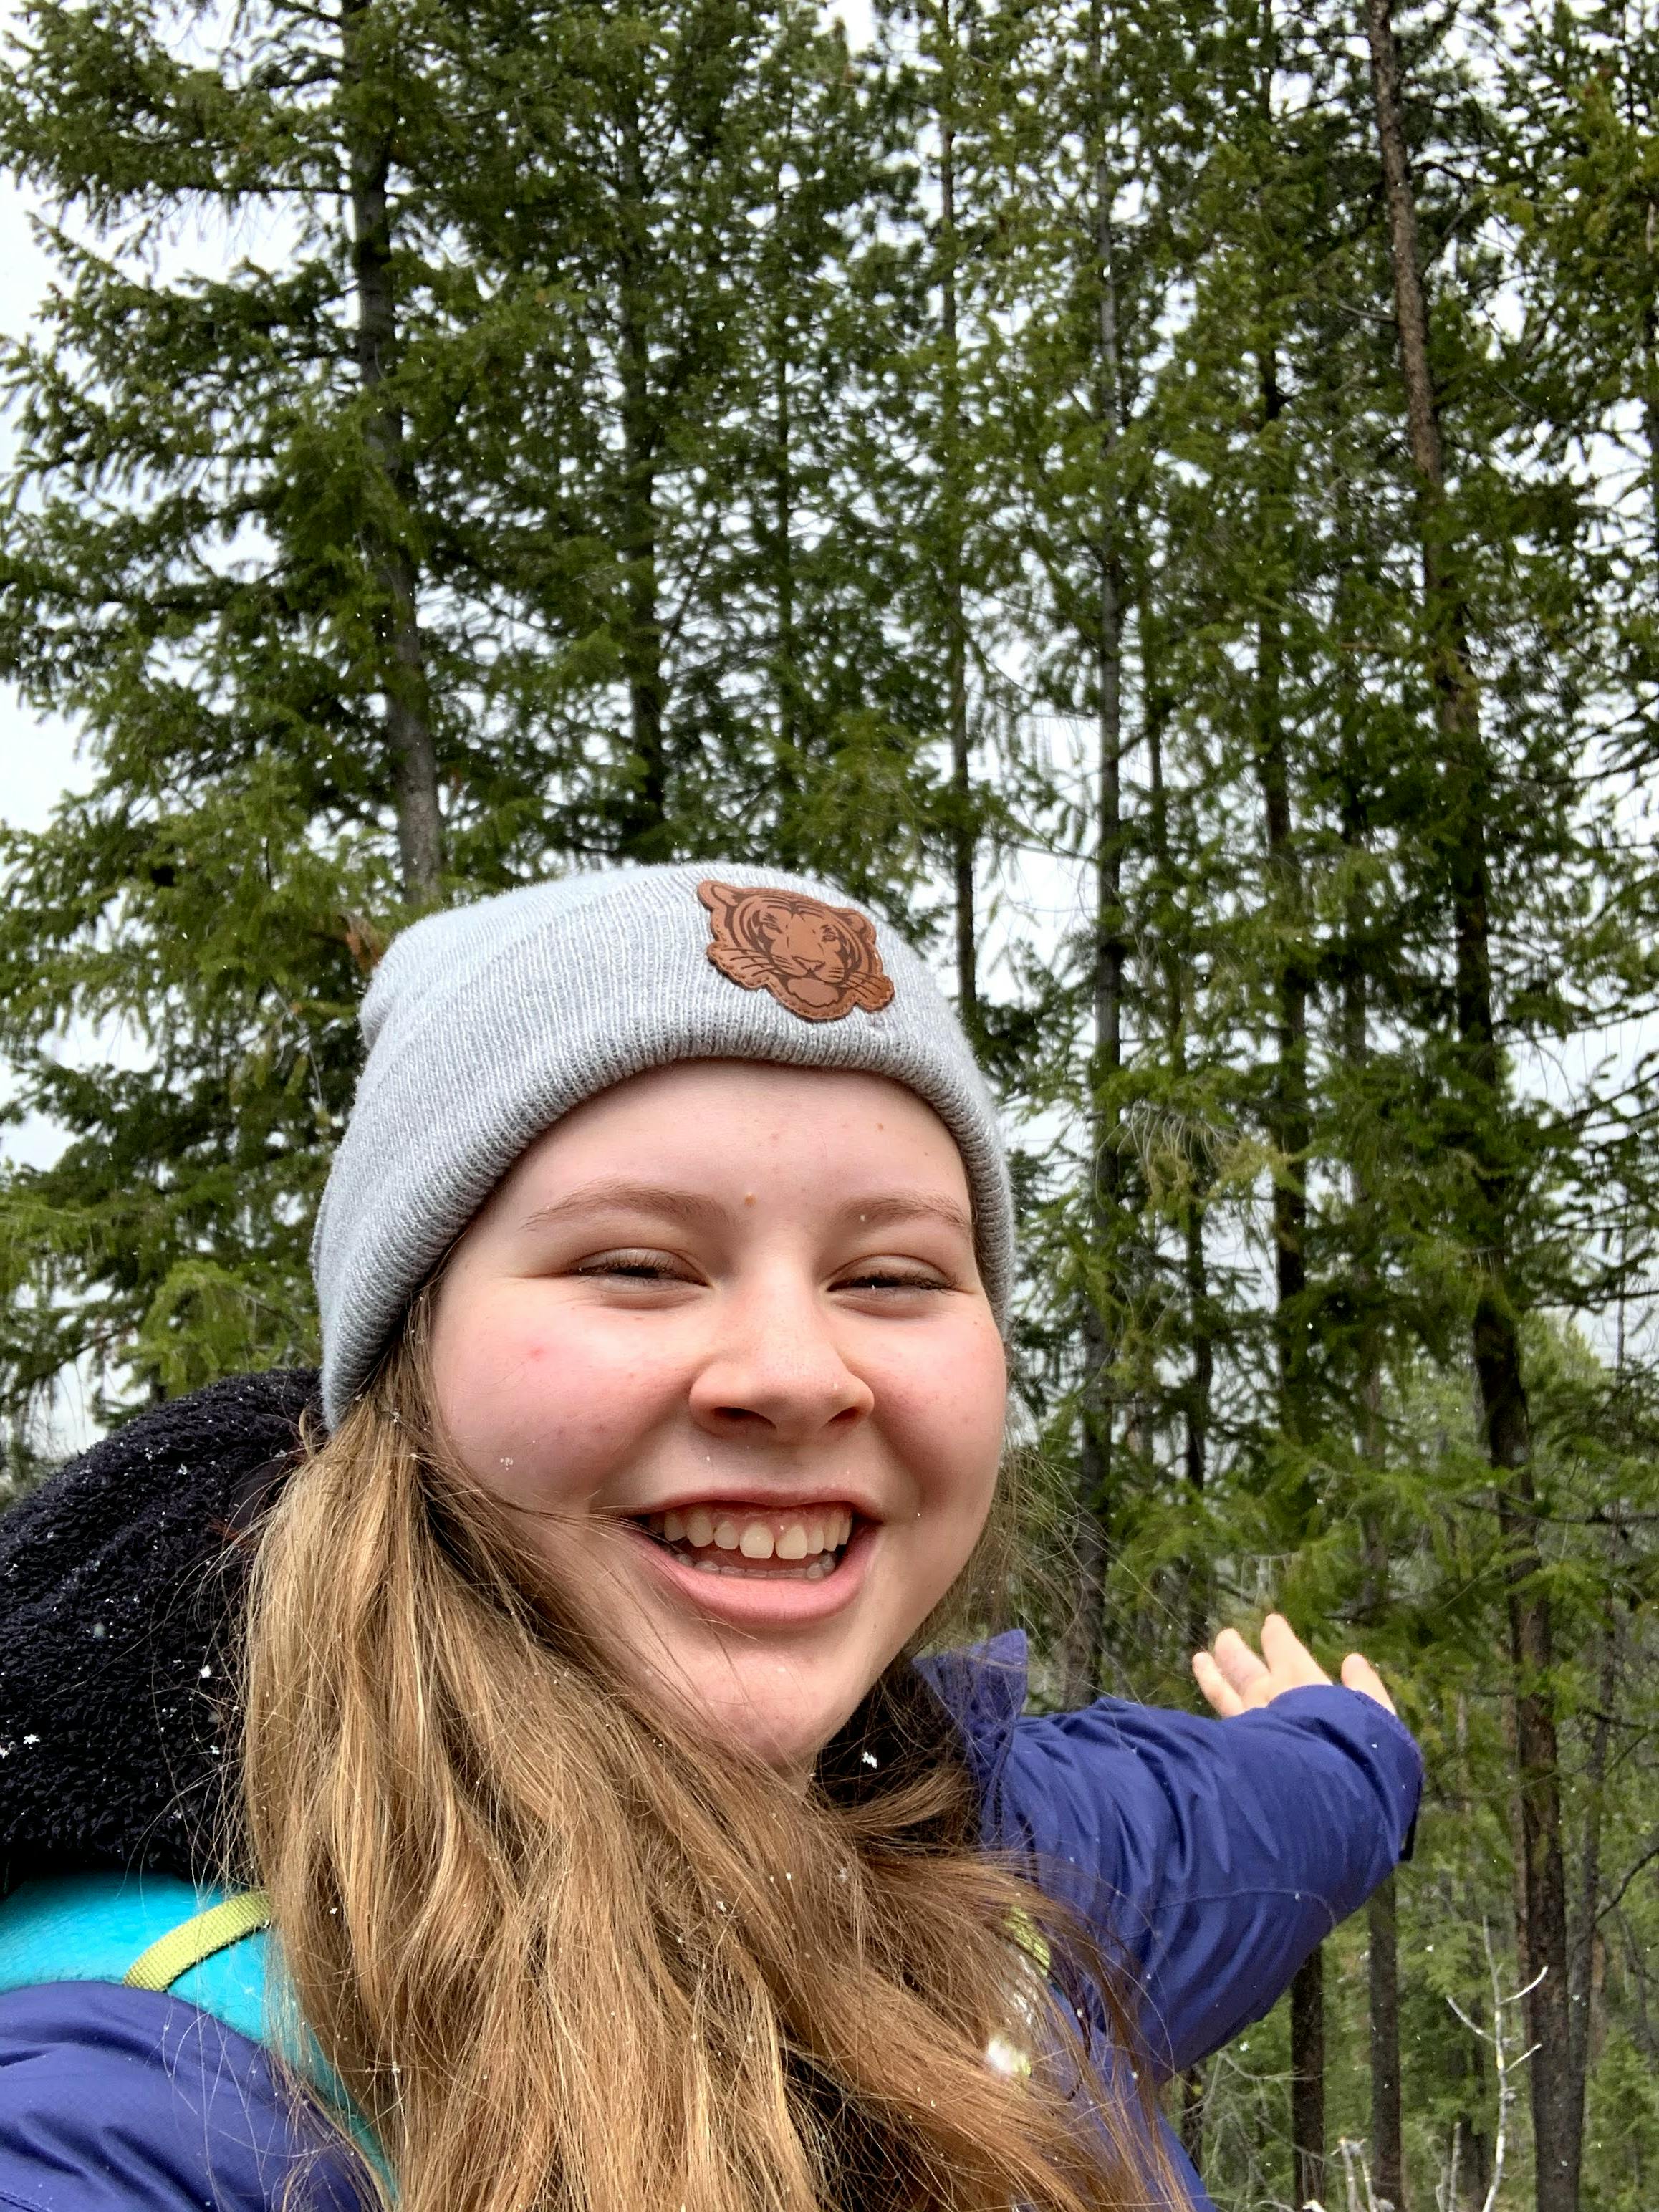 The author takes a selfie amidst tall pines and smiles with a beanie, jacket, rain coat, and backpack on. 